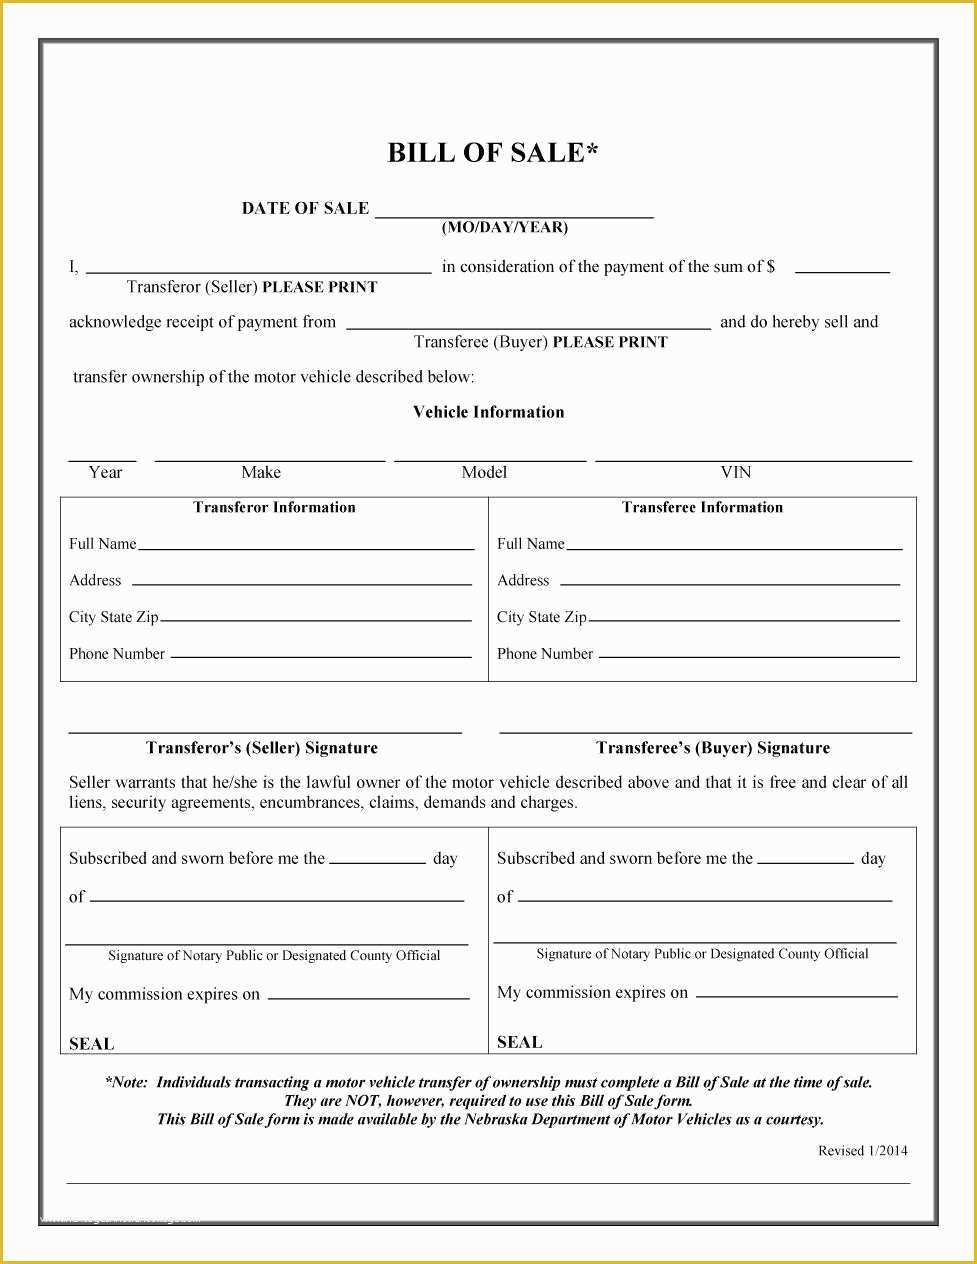 Bill Of Sale Free Template form Of 45 Fee Printable Bill Of Sale Templates Car Boat Gun